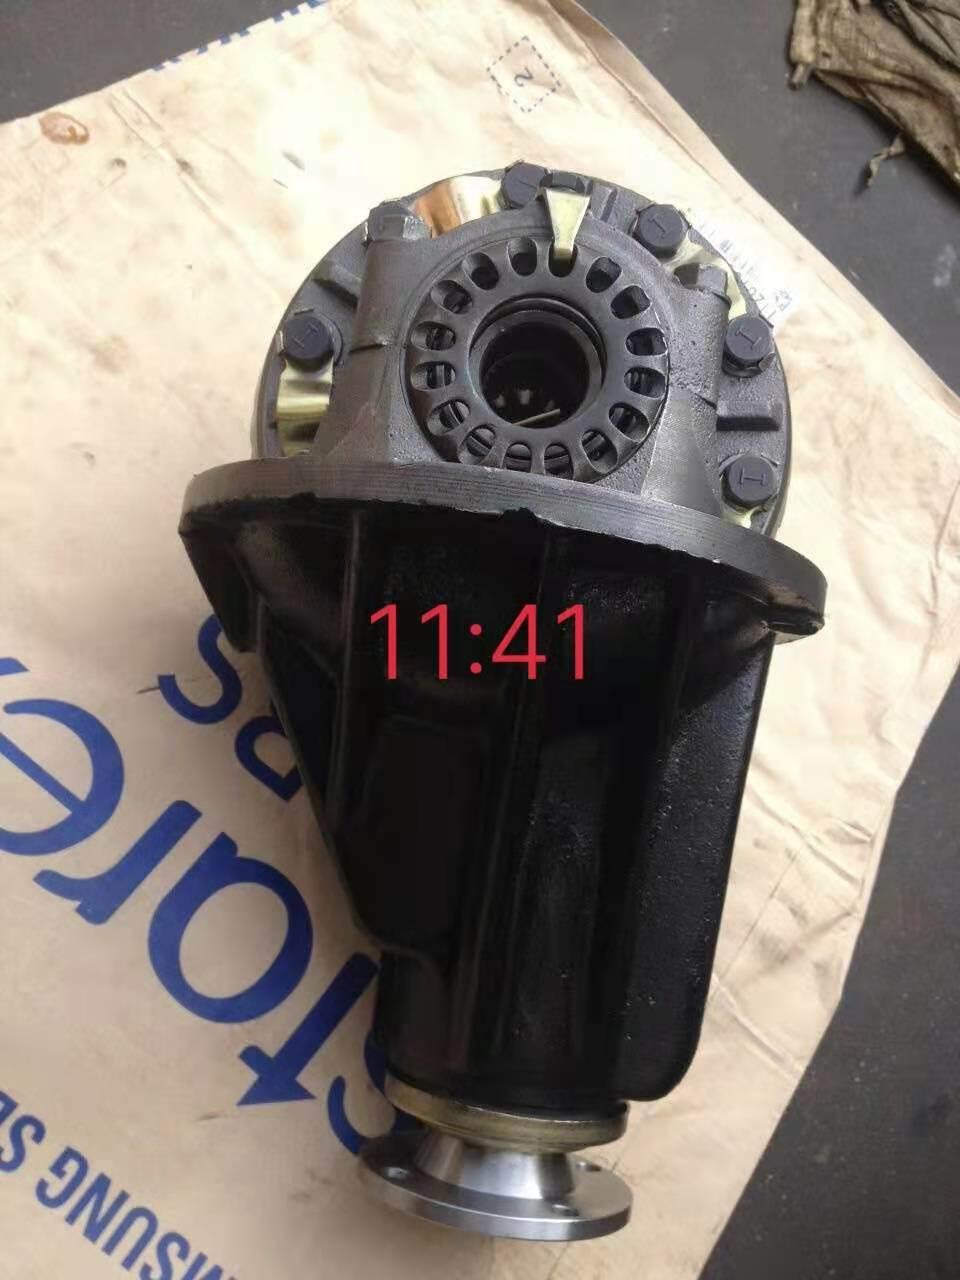 OEM 41110-26051 Differential for Toyota 22r, Hiace Ratio 4.55 (9: 41)